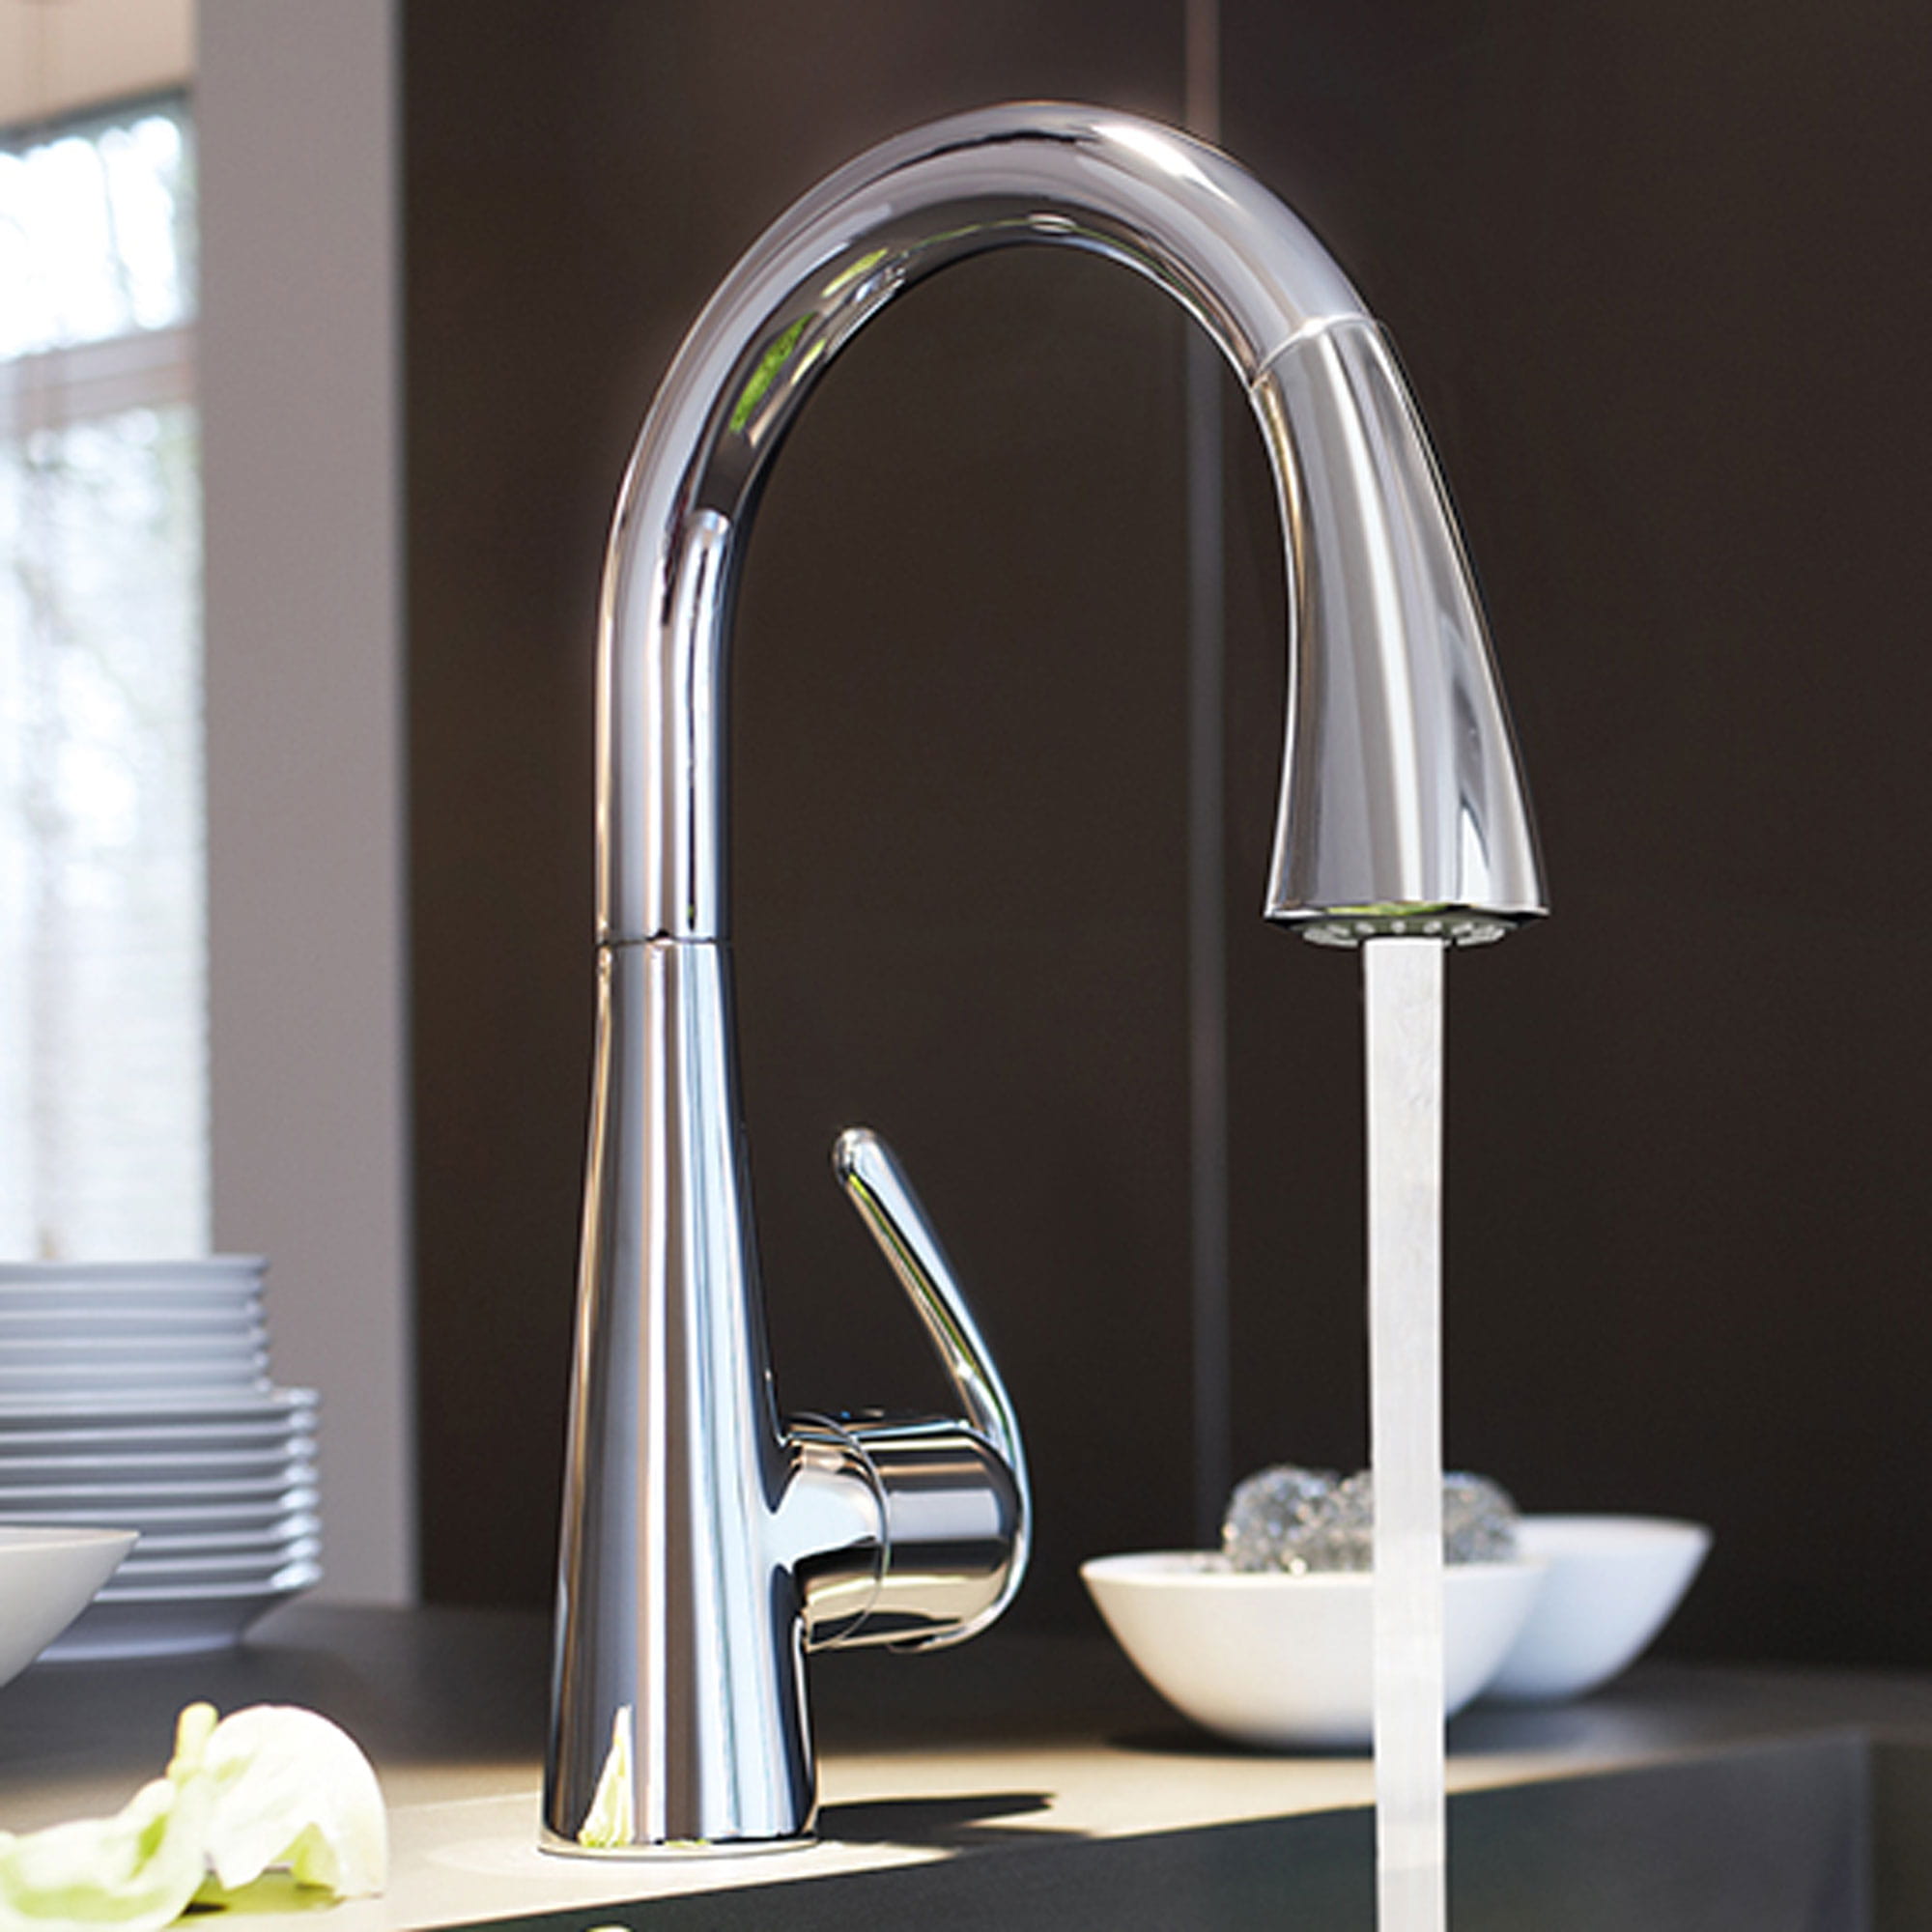 kitchen faucet with water running